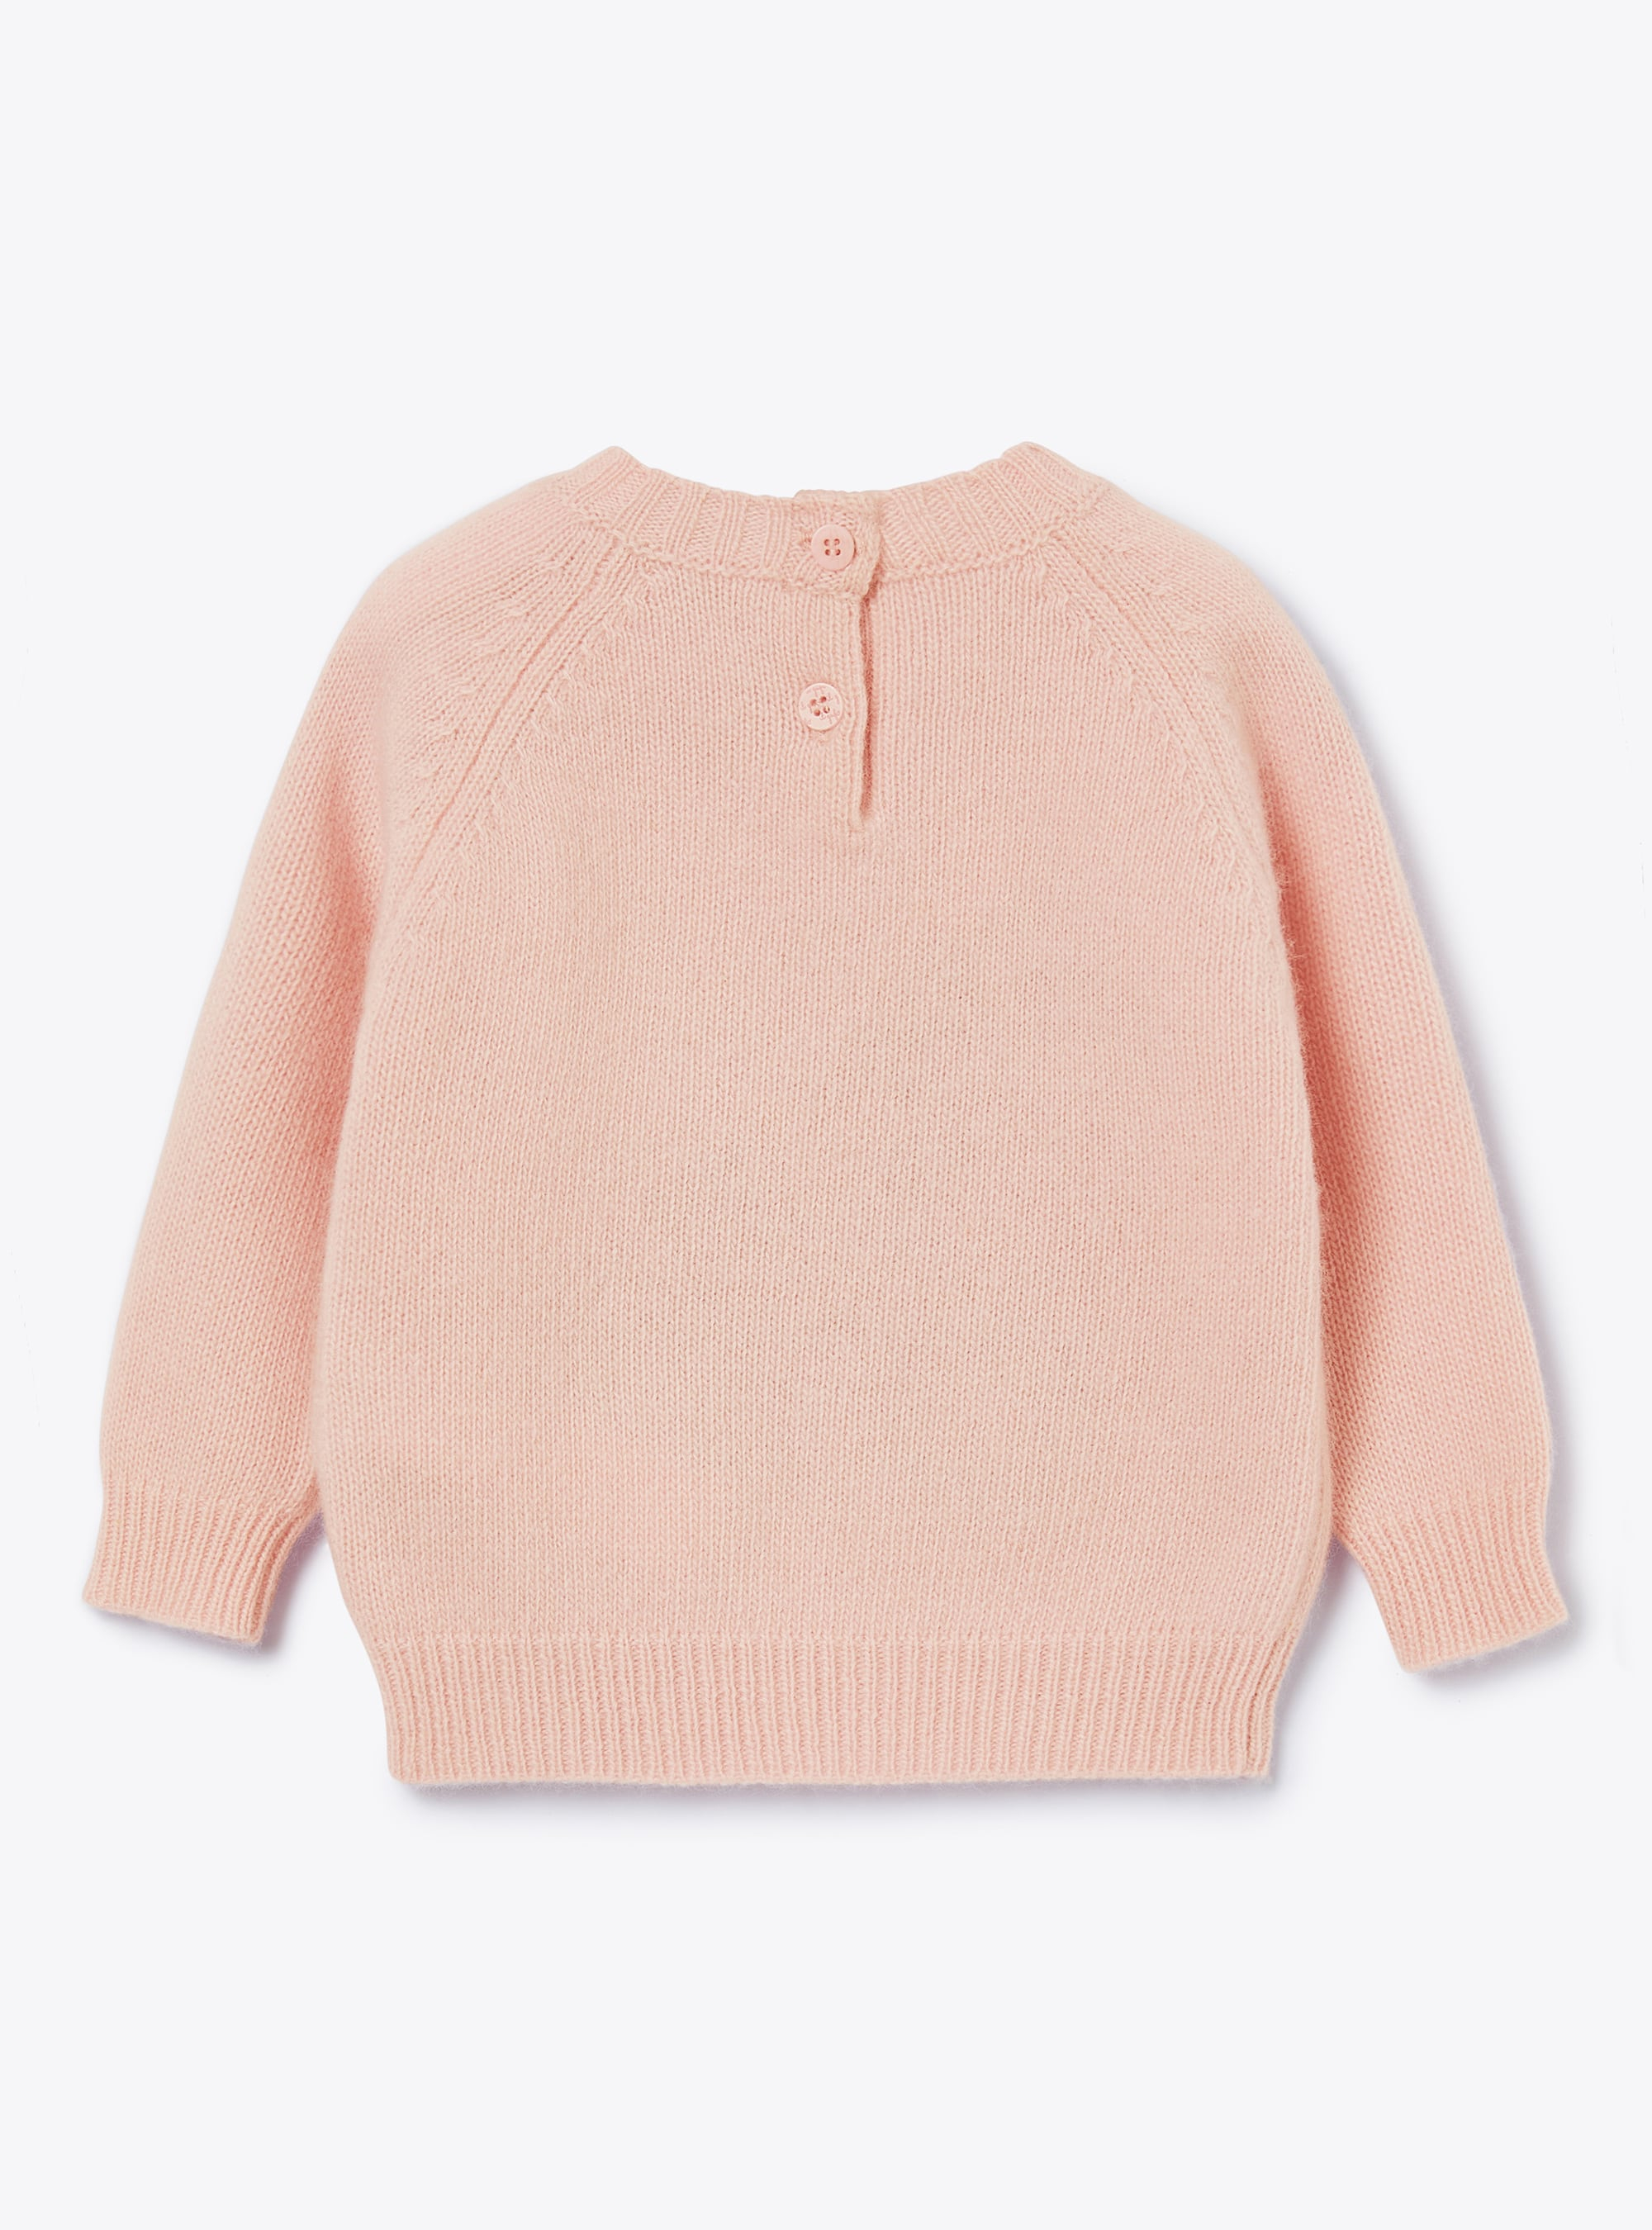 Pink wool sweater with teddy bear - Pink | Il Gufo